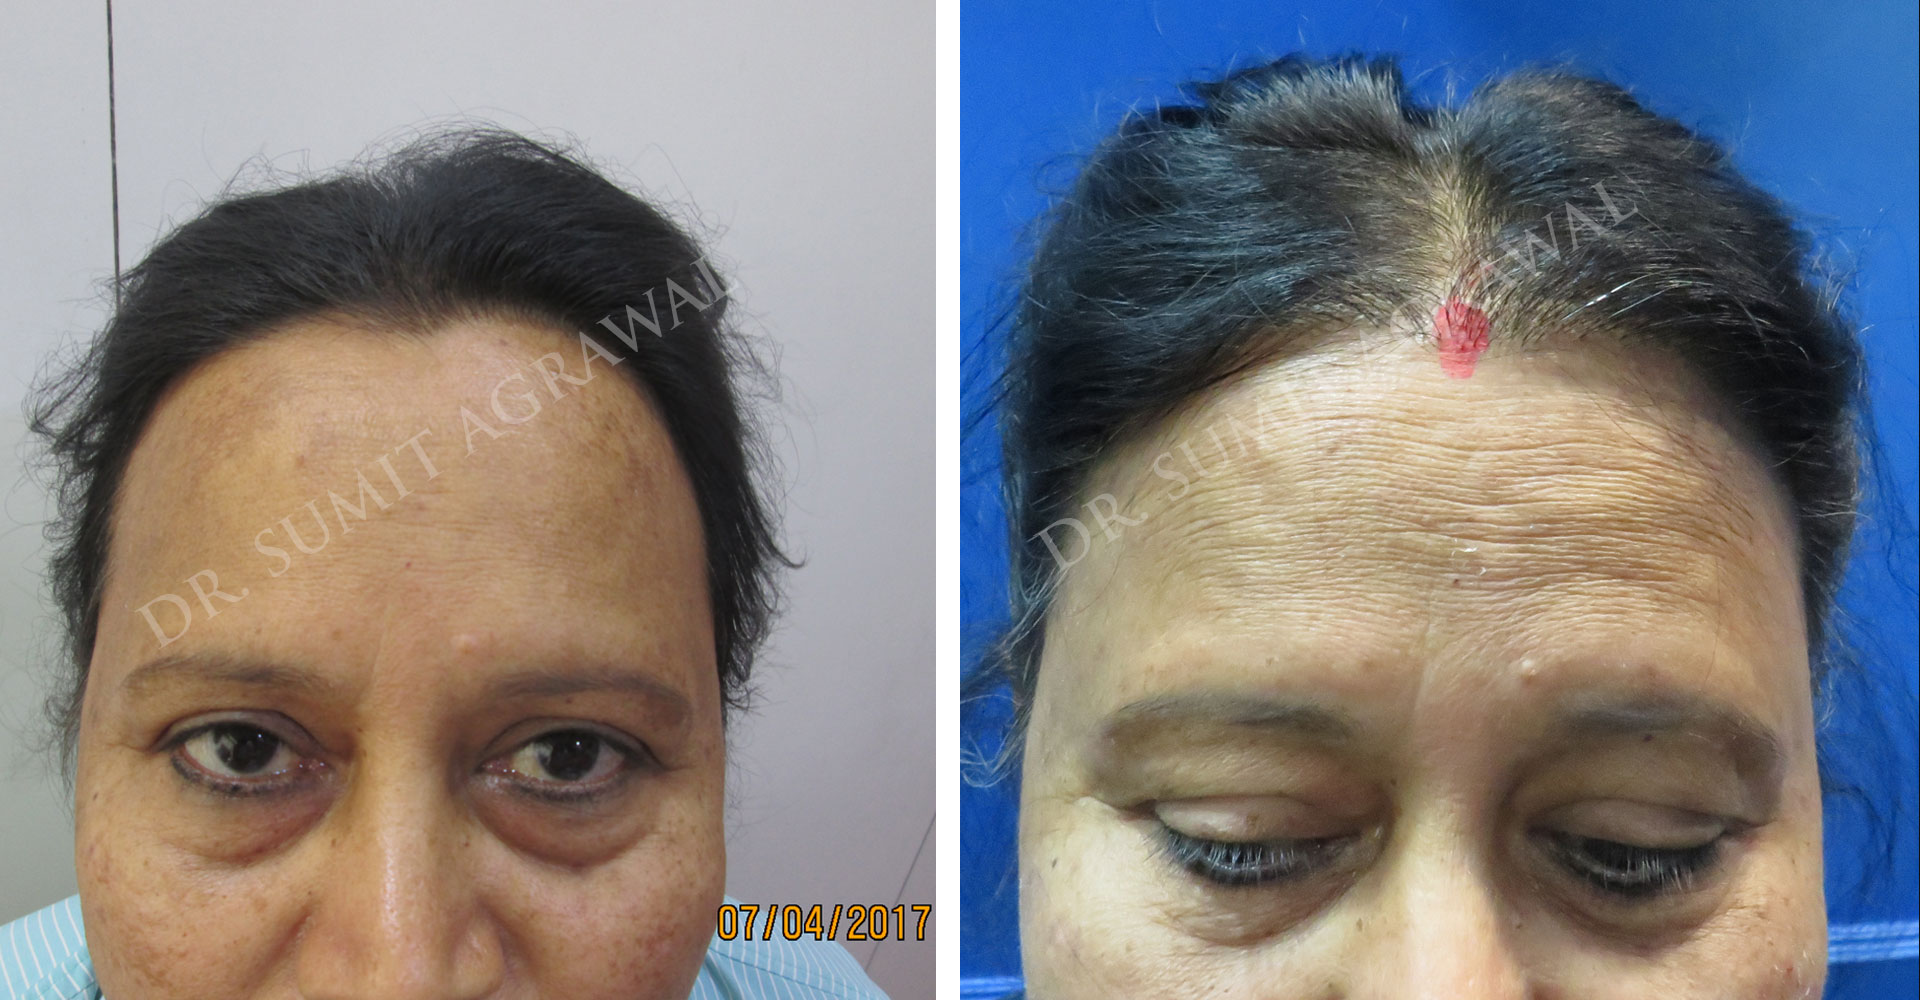 Female Hair Transplant Before and After photos of successful results by Dr. Urvashi Chandra.